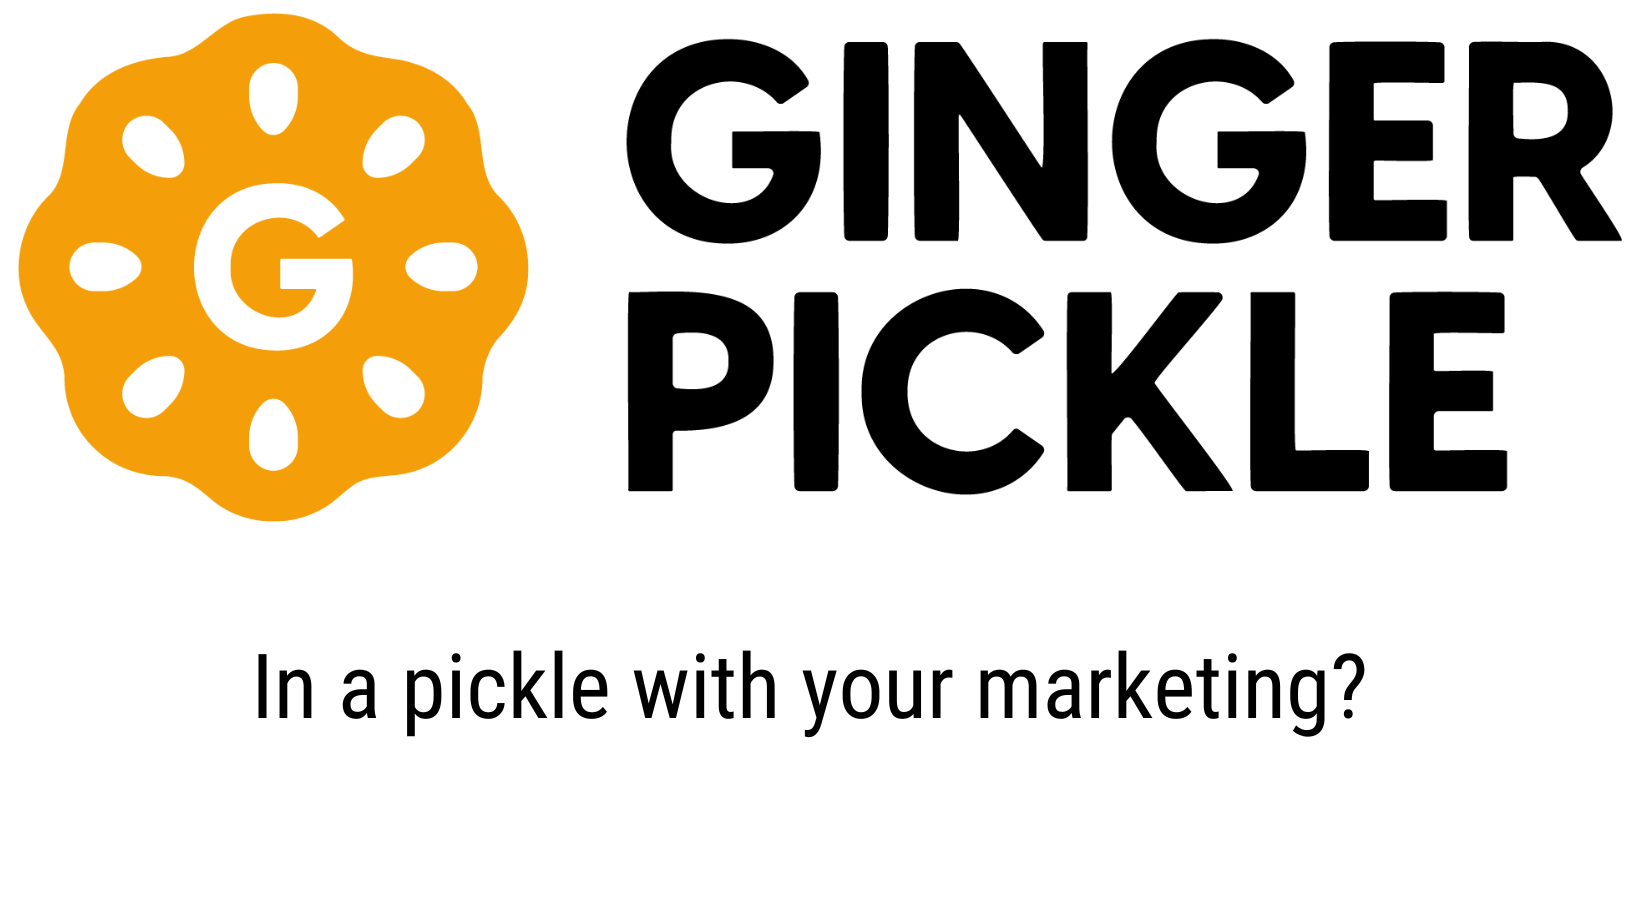 Ginger Pickle - In a pickle with your marketing?